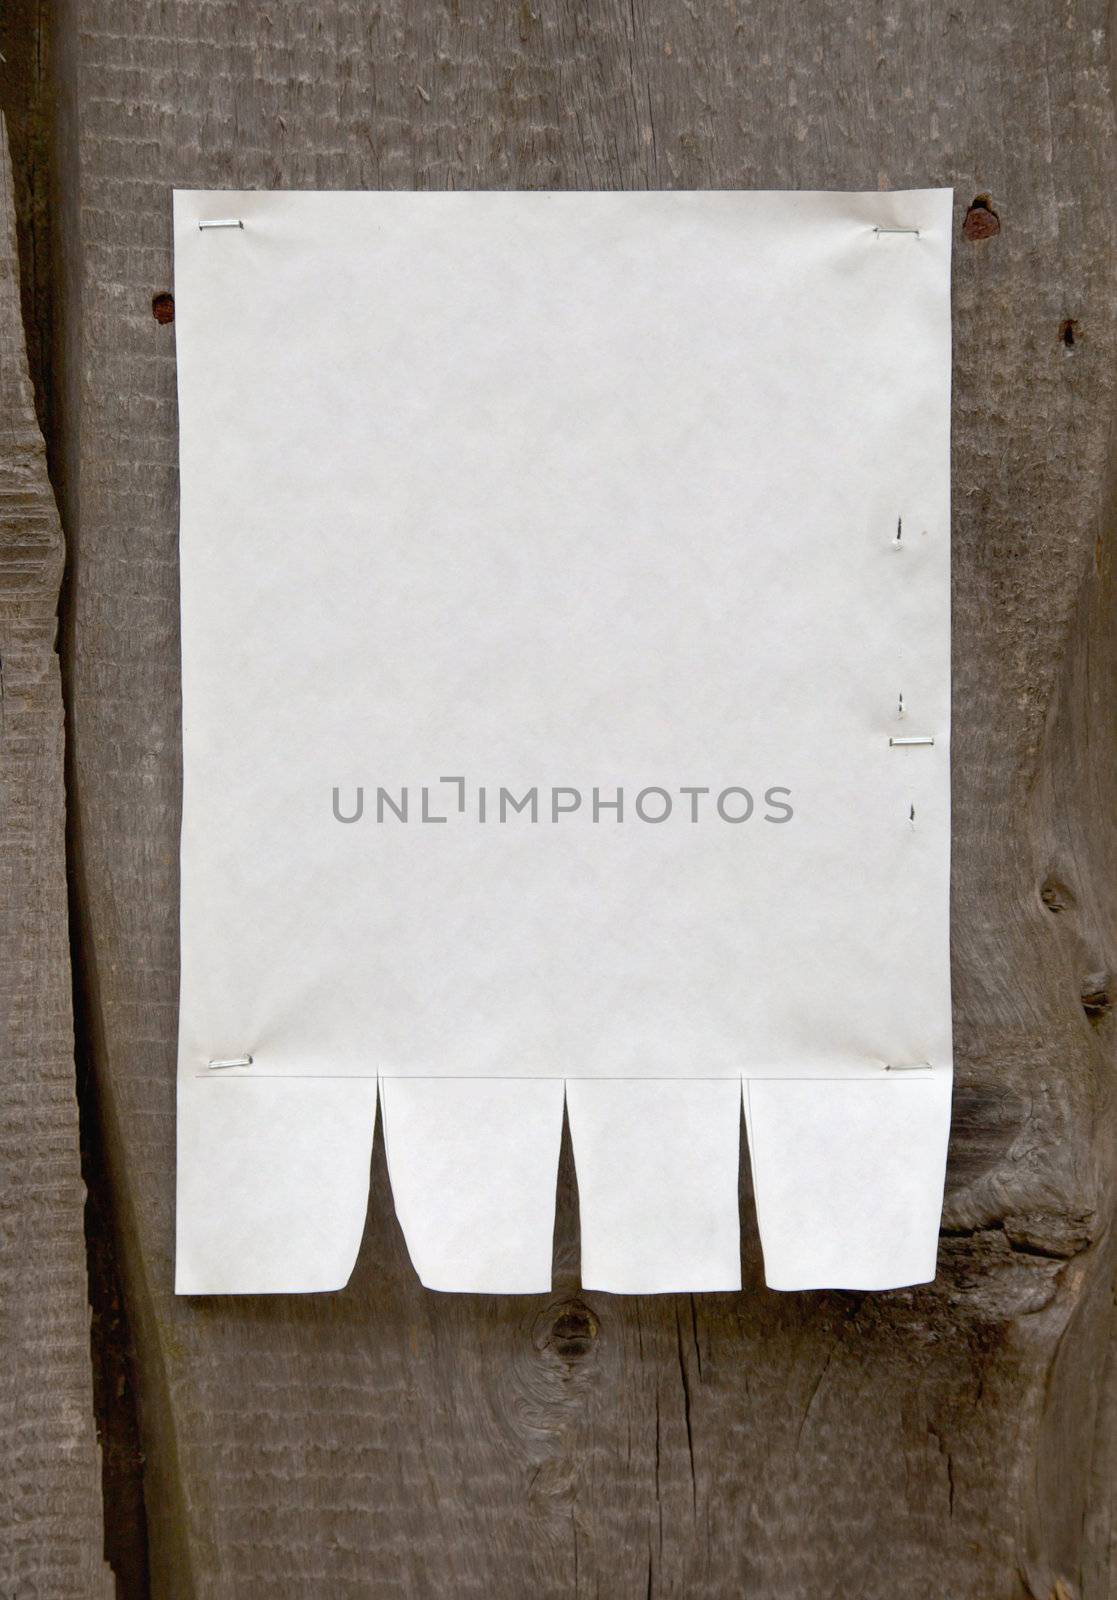 The paper announcement on a wooden fence - a template